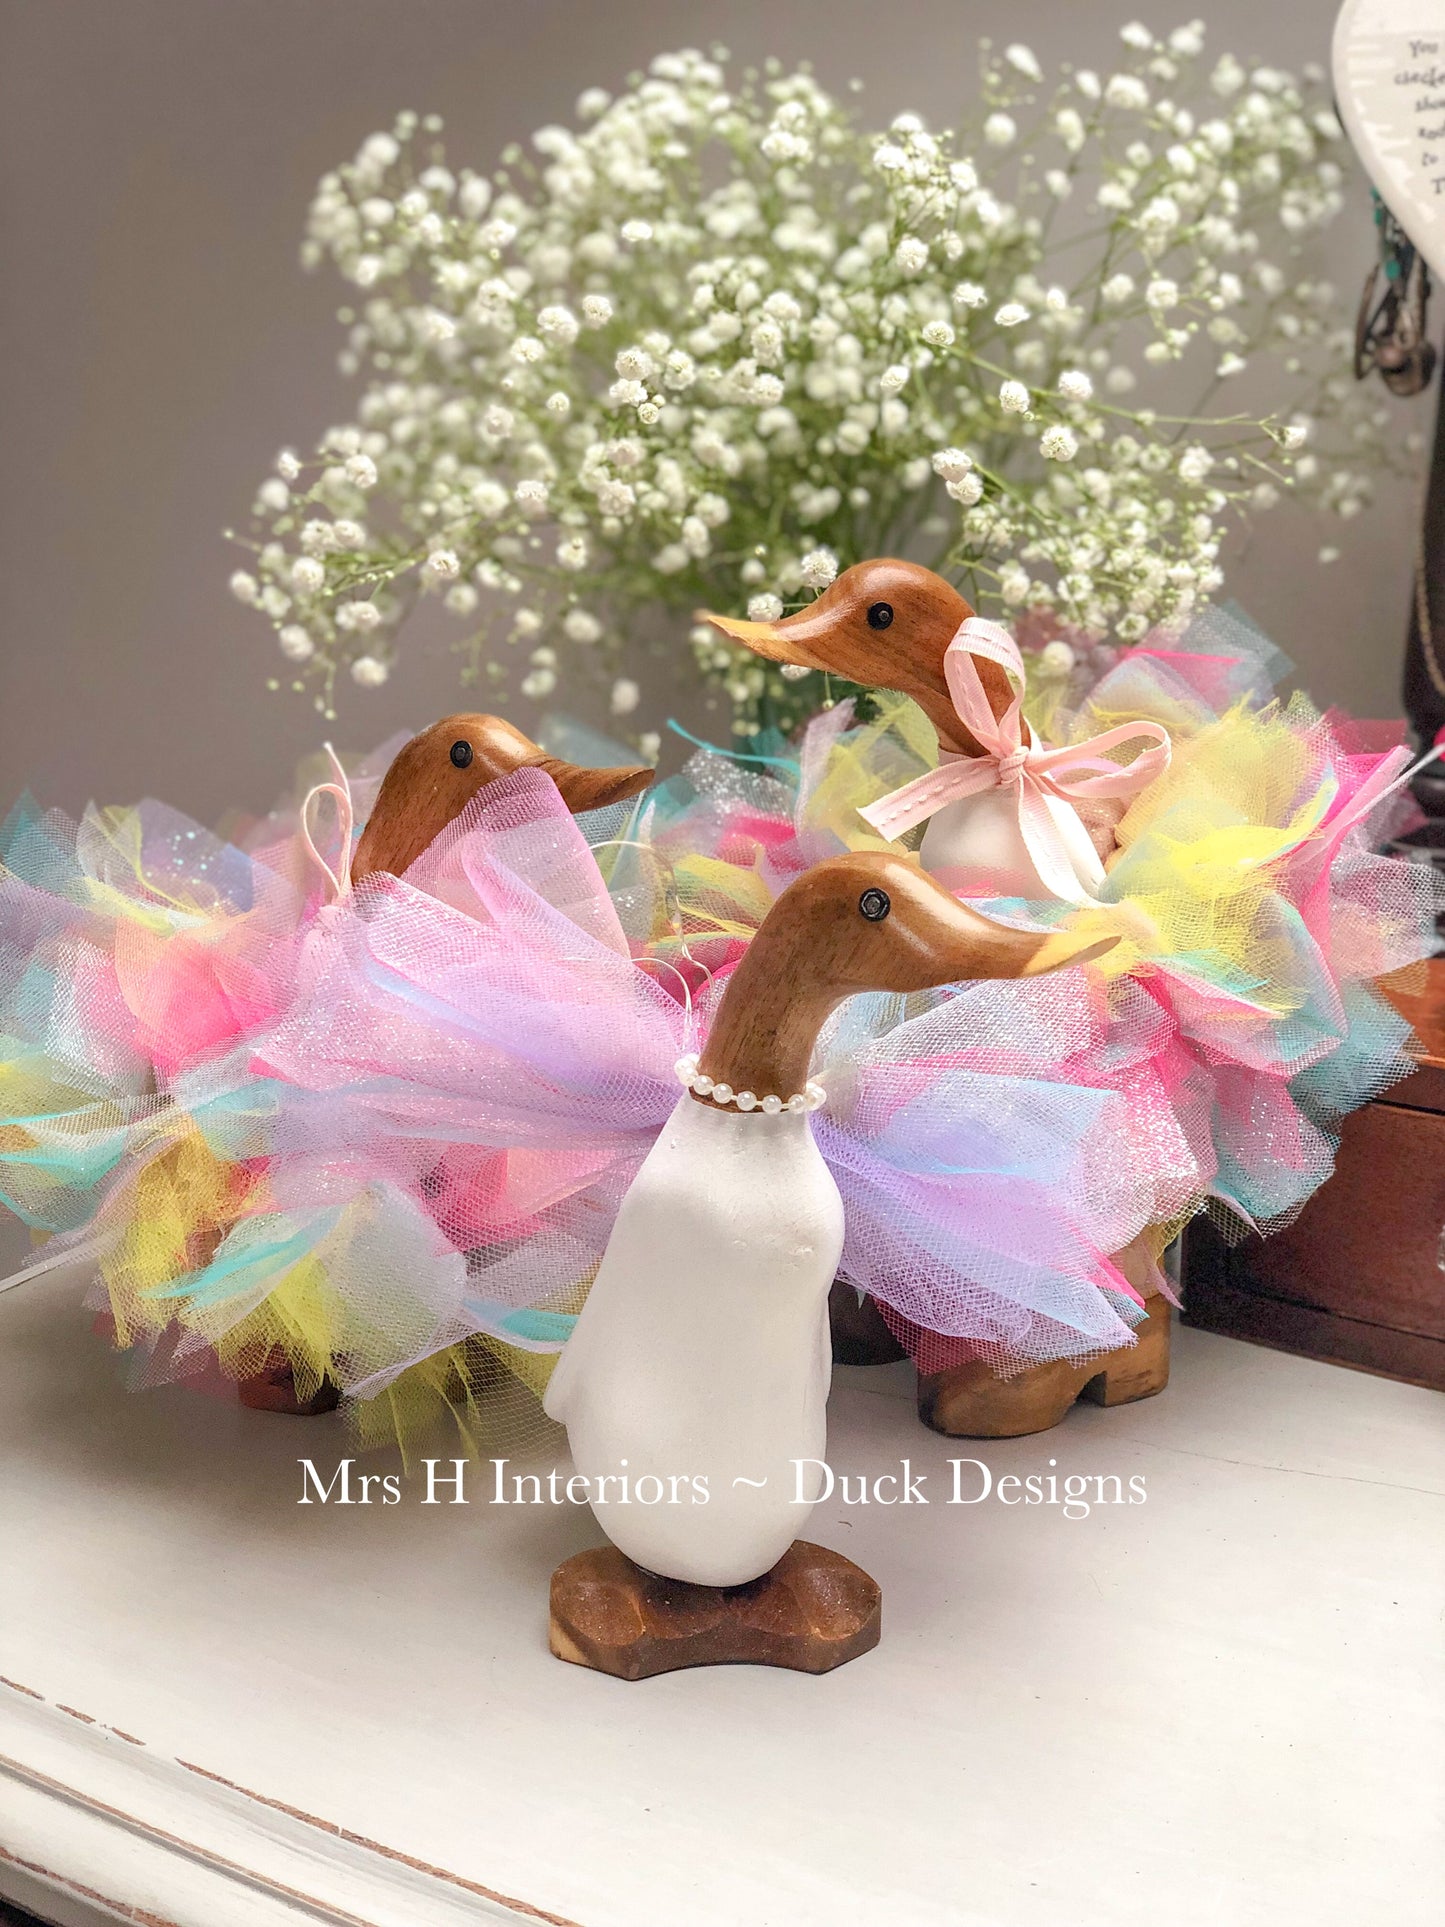 Georgie Rainbow Tutu Ducklet - Decorated Wooden Duck in Boots by Mrs H the Duck Lady